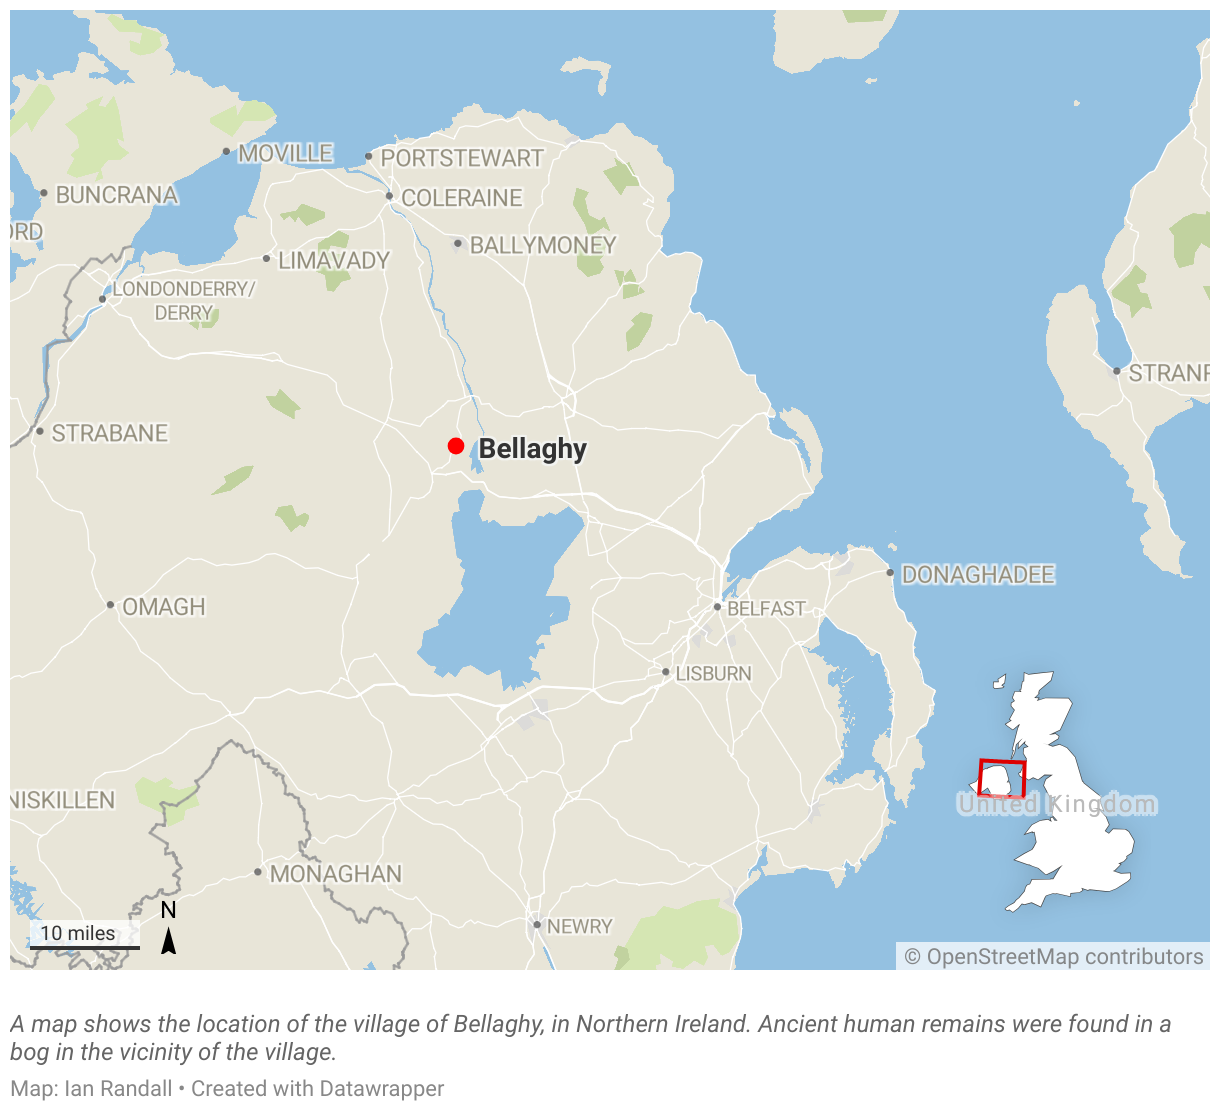 A map shows the location of the village of Bellaghy, in Northern Ireland.